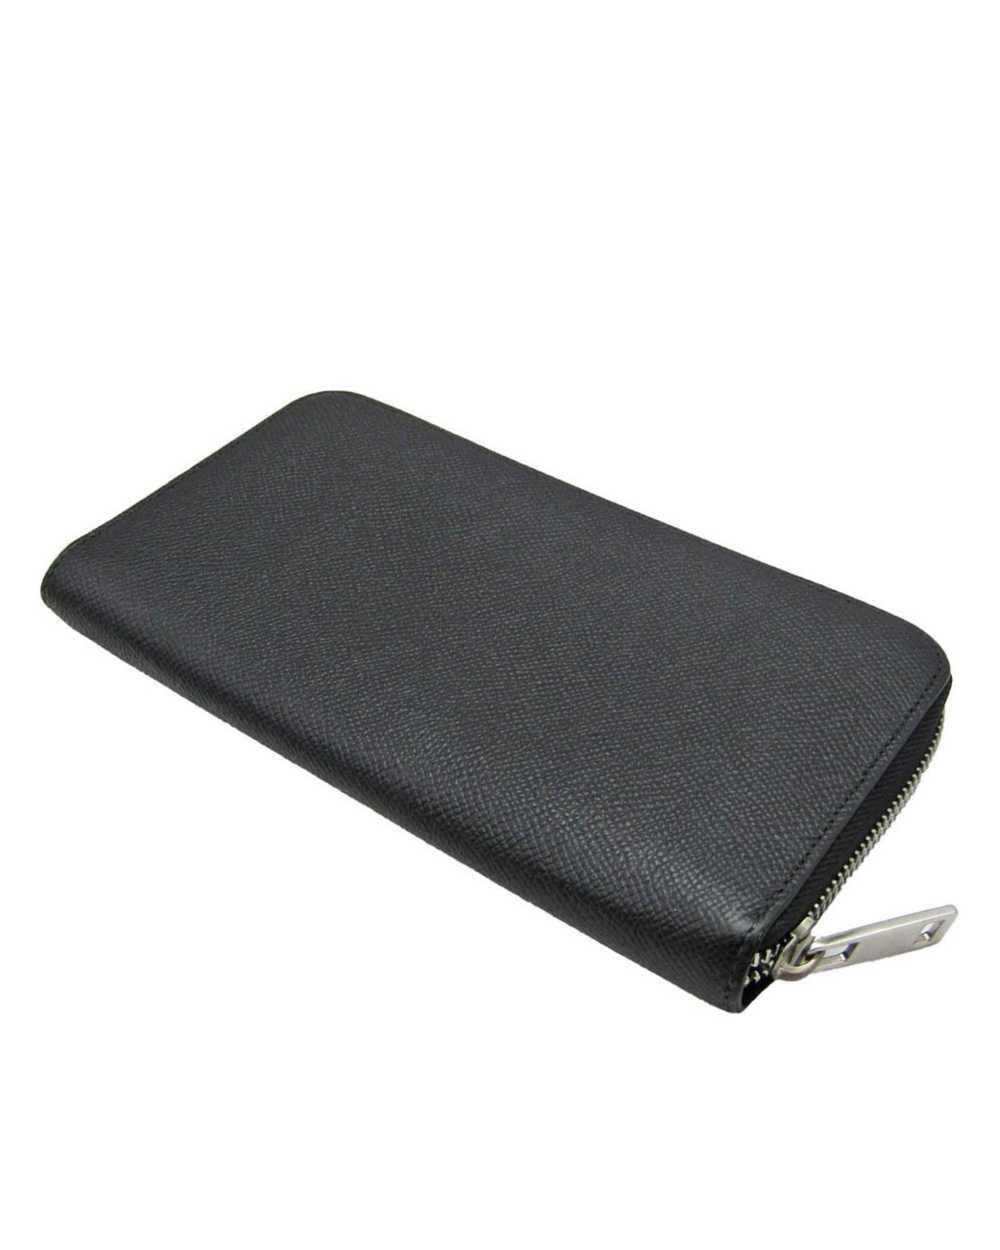 Givenchy Black Leather Long Wallet by Luxury Desi… - image 2